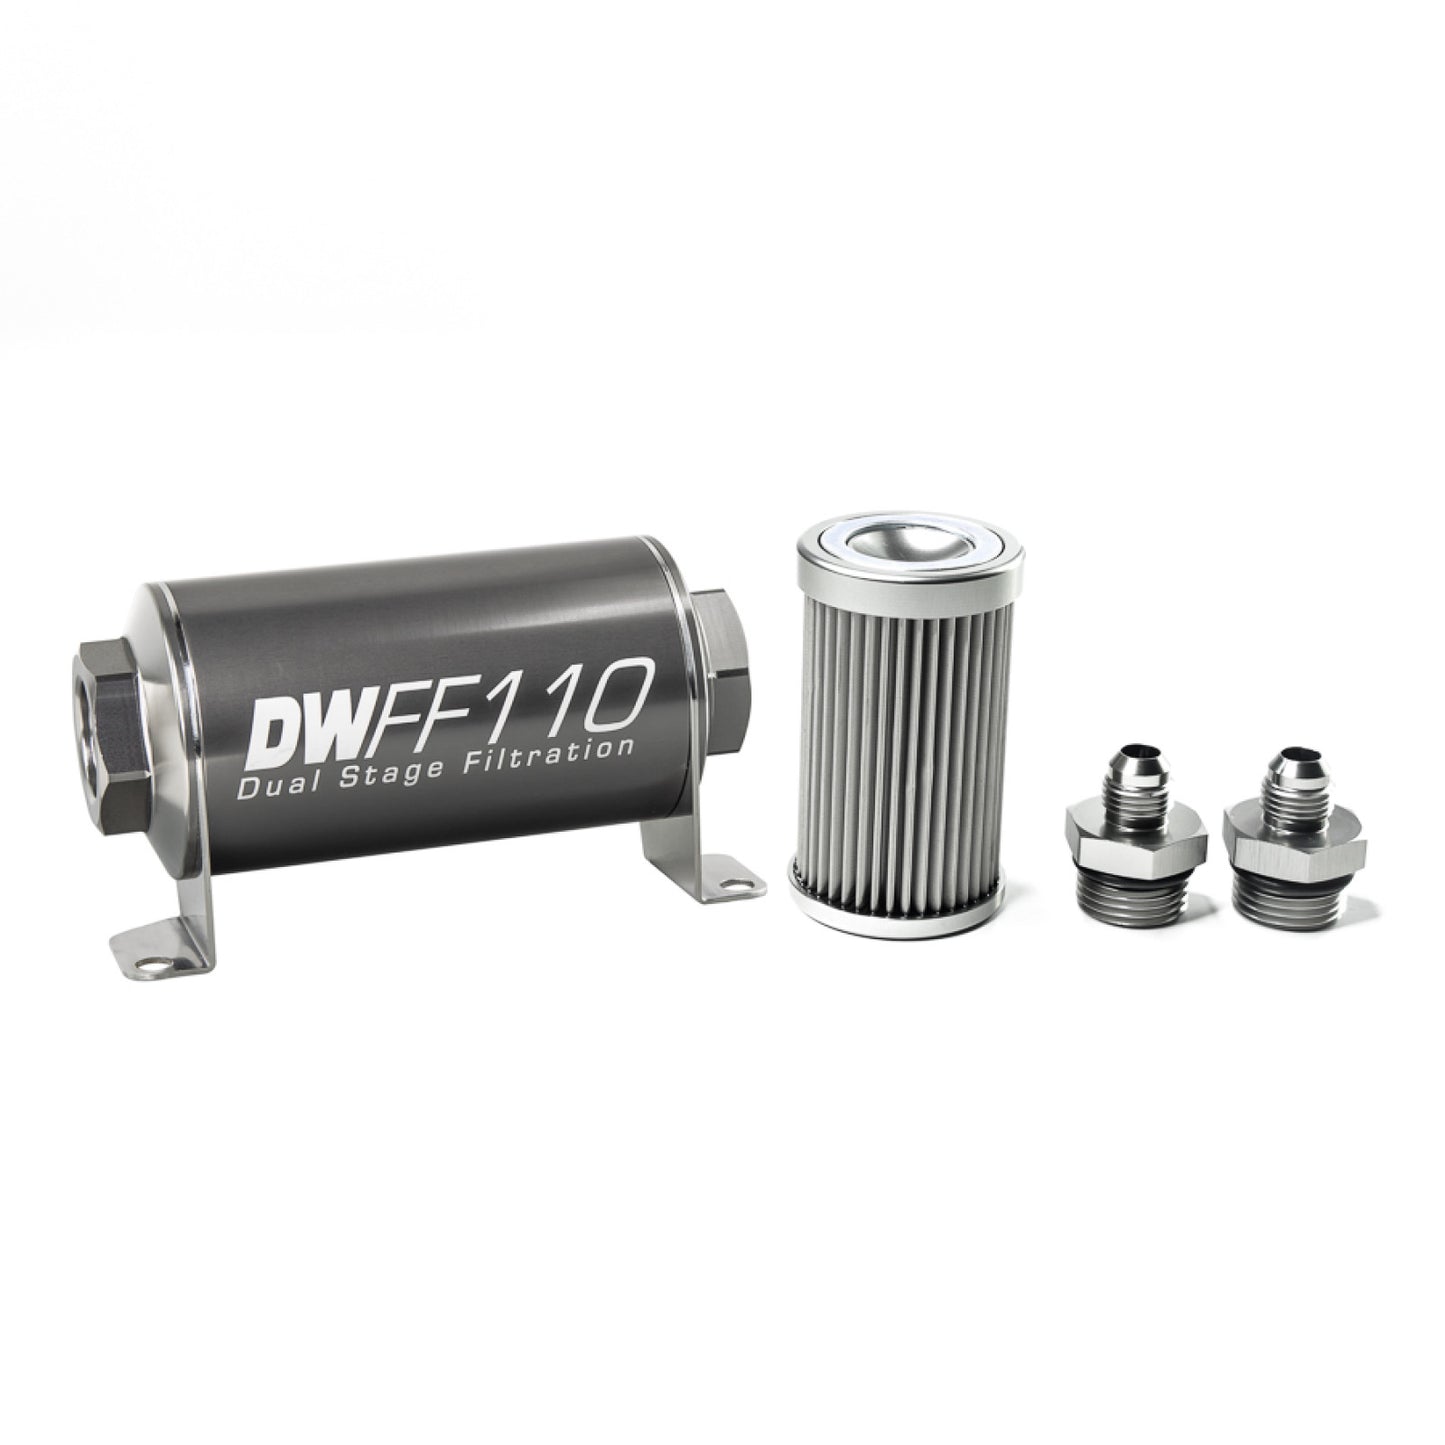 Deatschwerks In-line fuel filter element and housing kit, stainless steel 10 micron, -6AN, 110mm. Universal